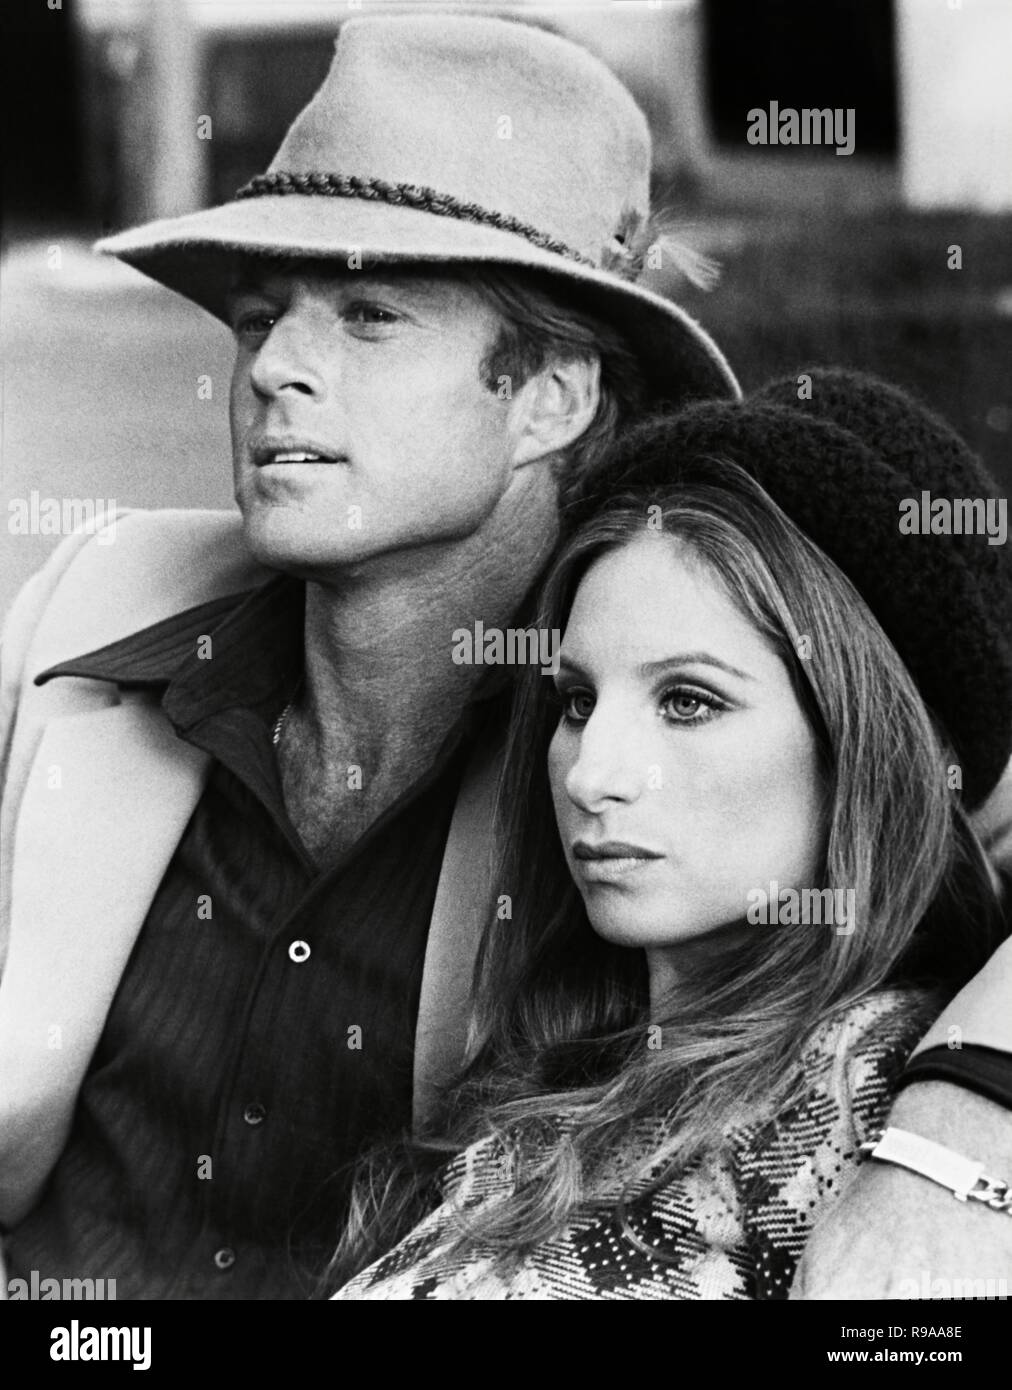 Original film title: THE WAY WE WERE. English title: THE WAY WE WERE. Year: 1973. Director: SYDNEY POLLACK. Stars: BARBRA STREISAND; ROBERT REDFORD. Credit: COLUMBIA PICTURES / Album Stock Photo